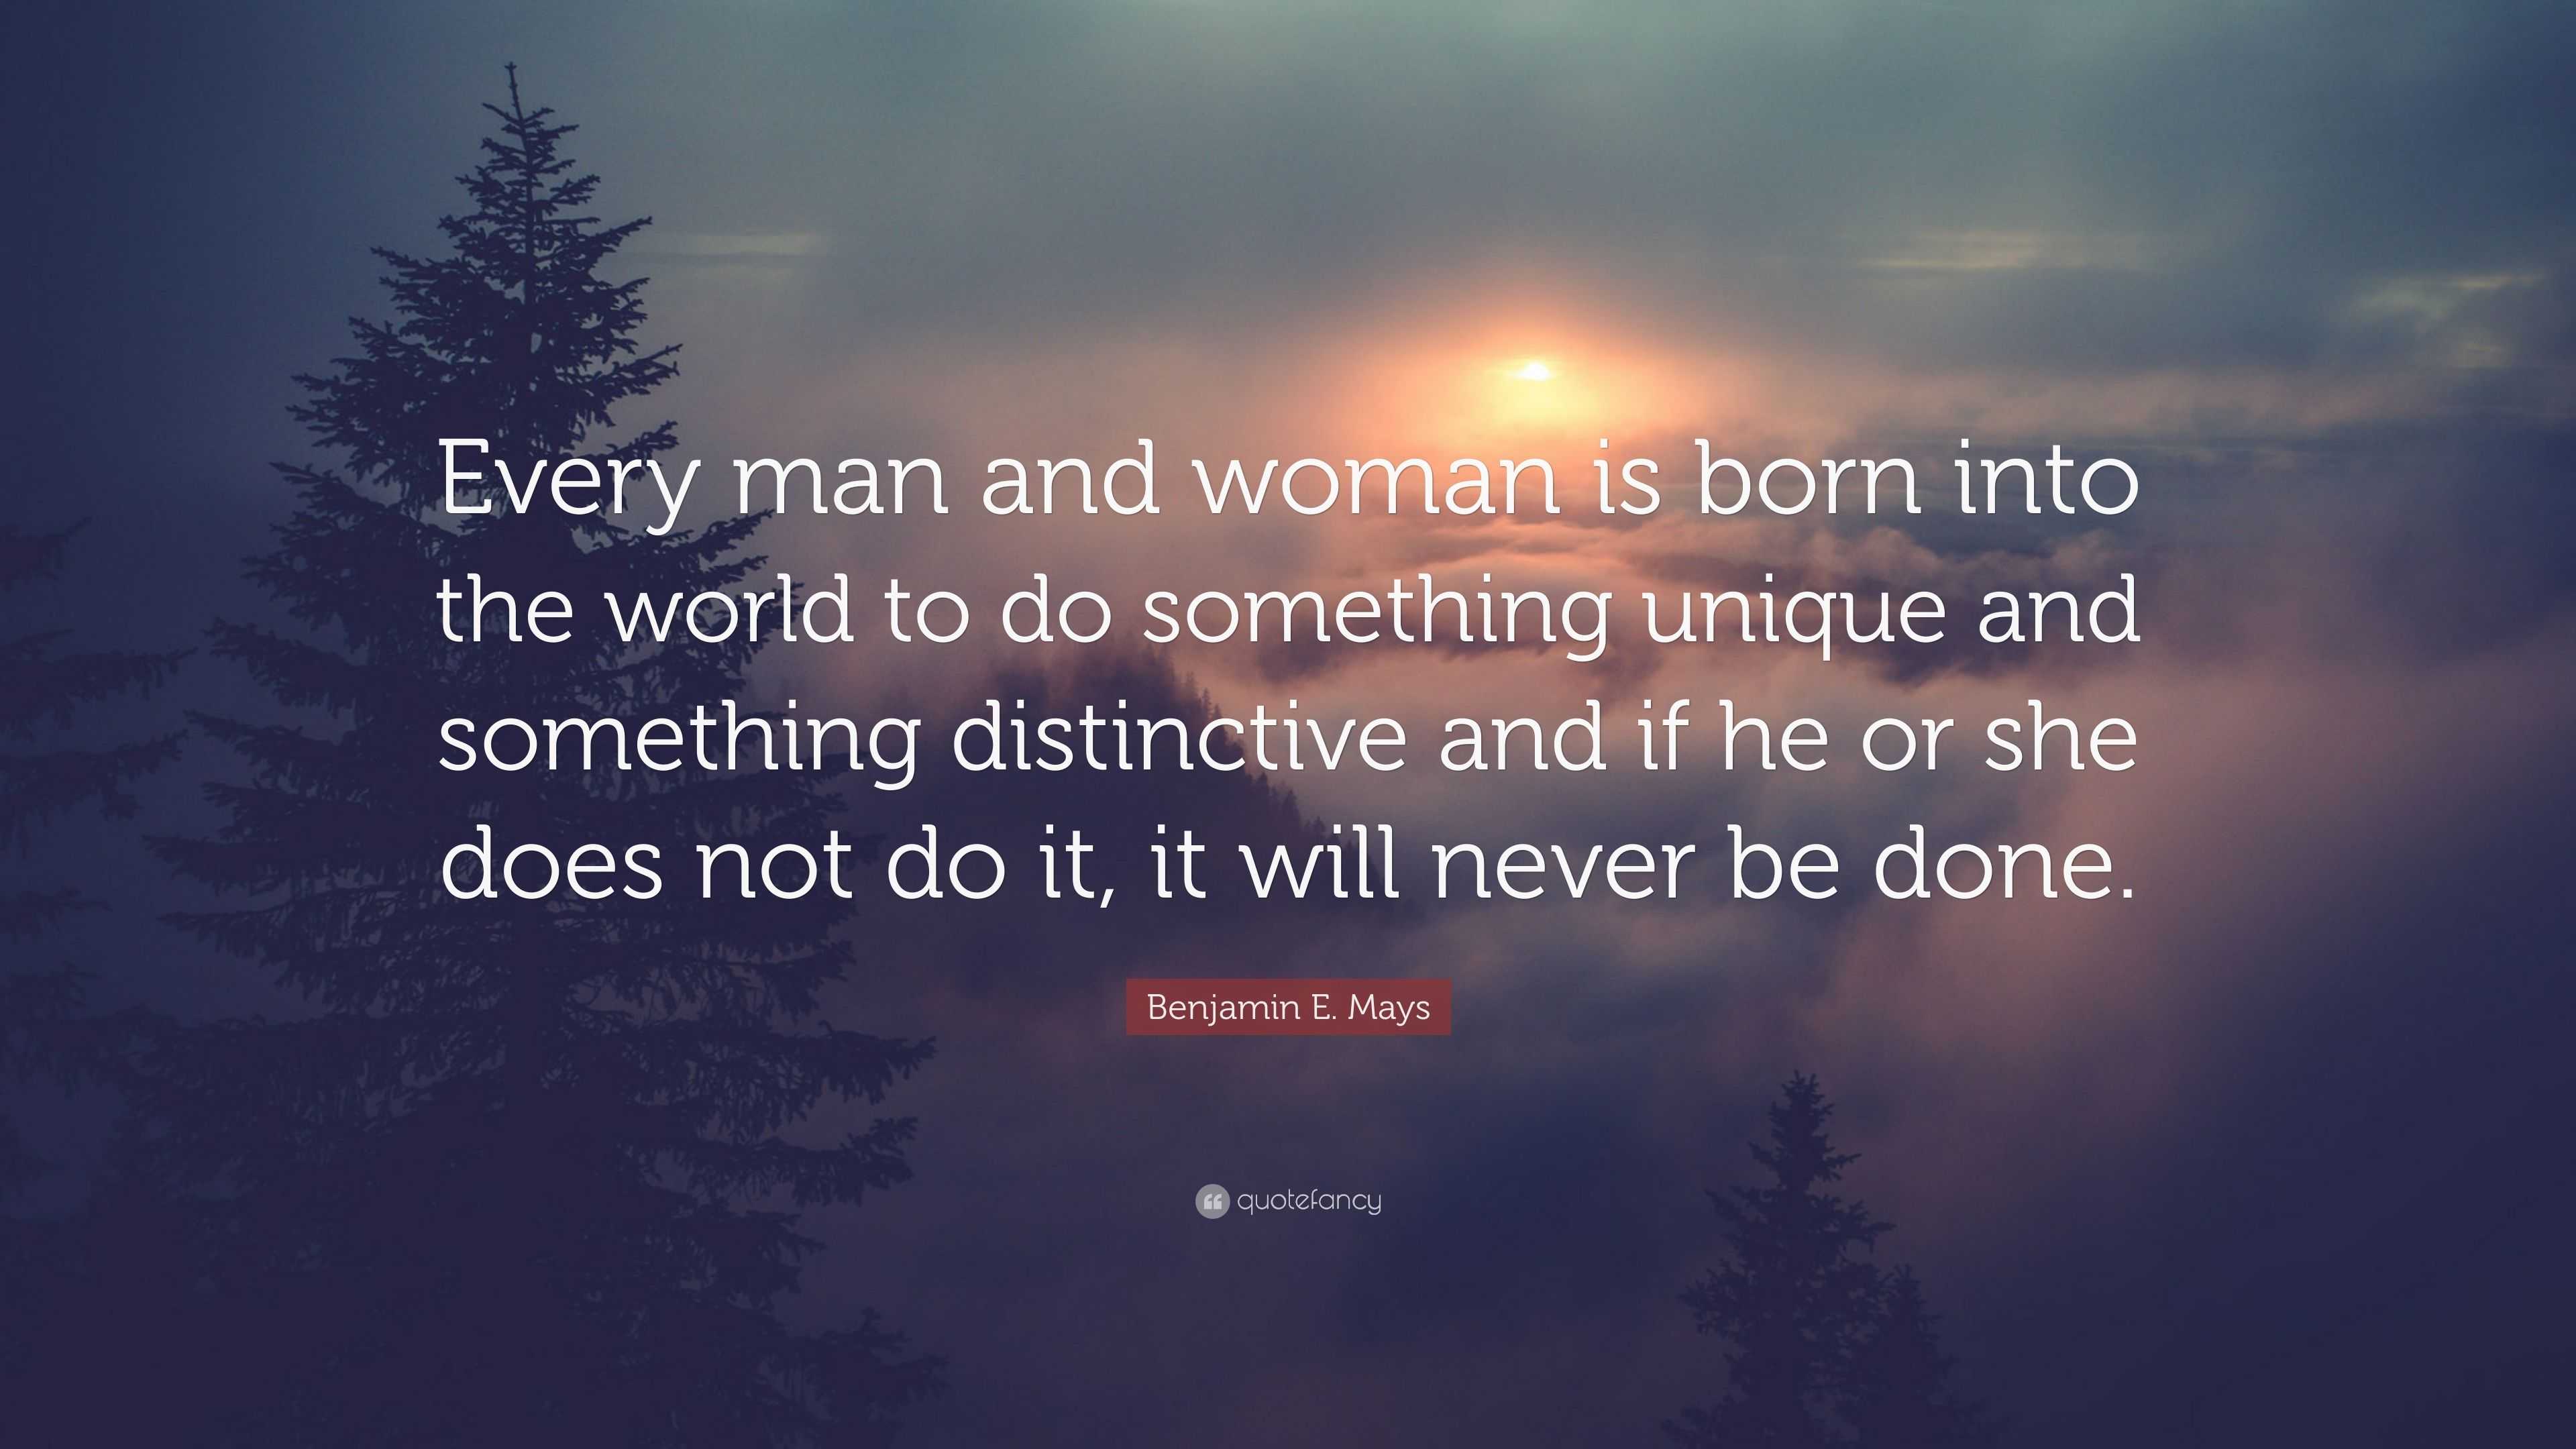 Benjamin E. Mays Quote: “Every man and woman is born into the world to ...